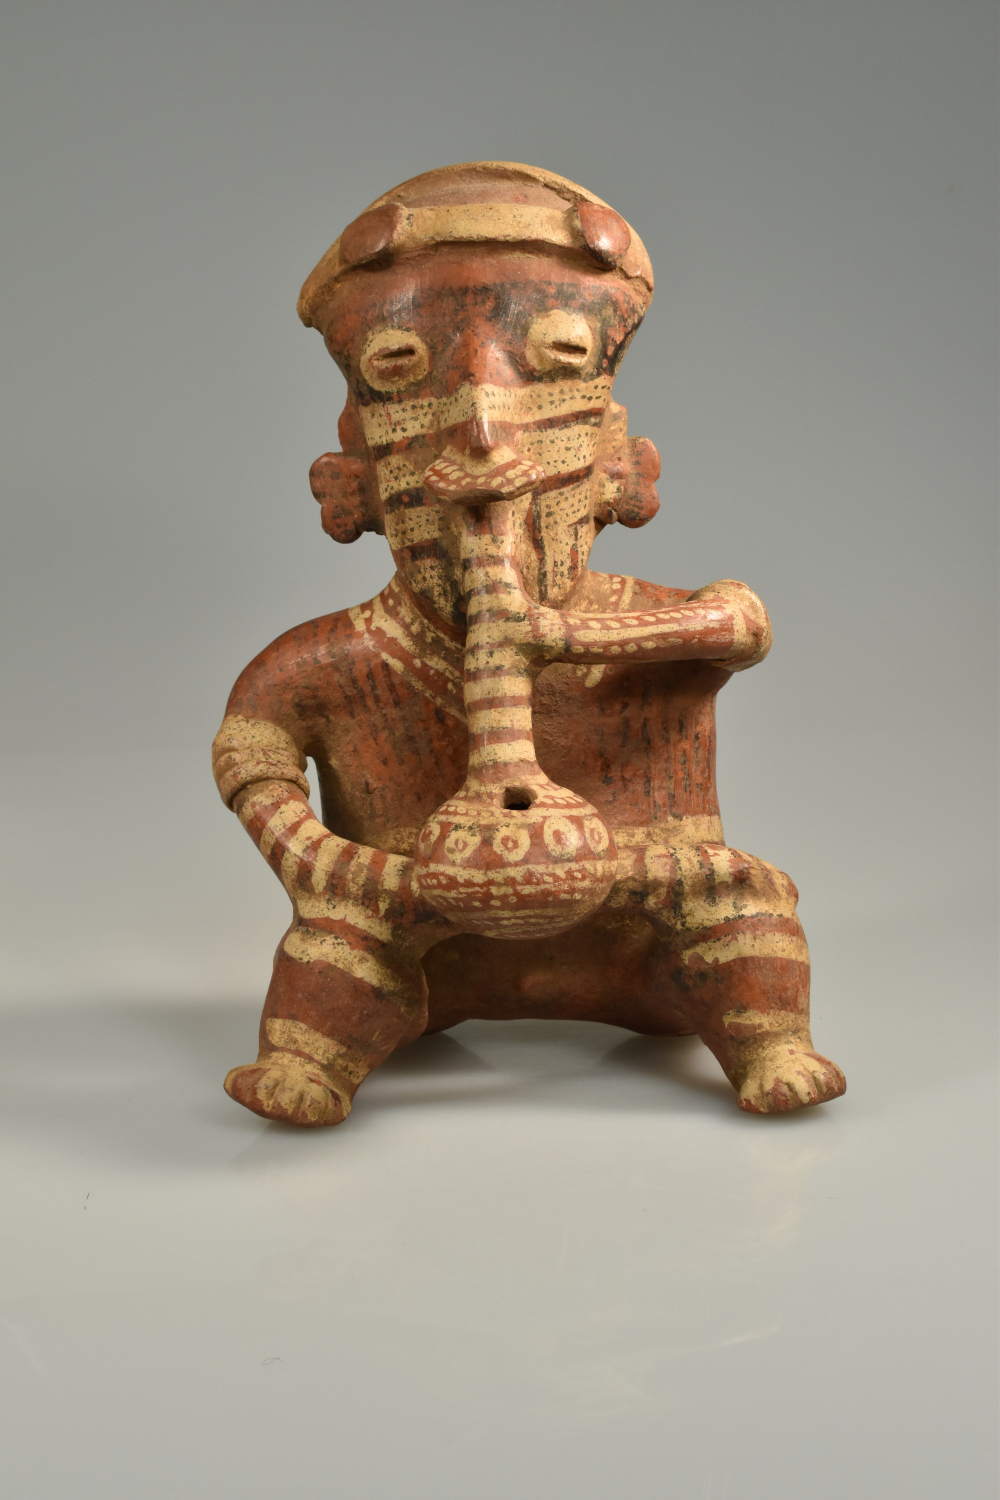 Effigy of Flute Player from Mexico